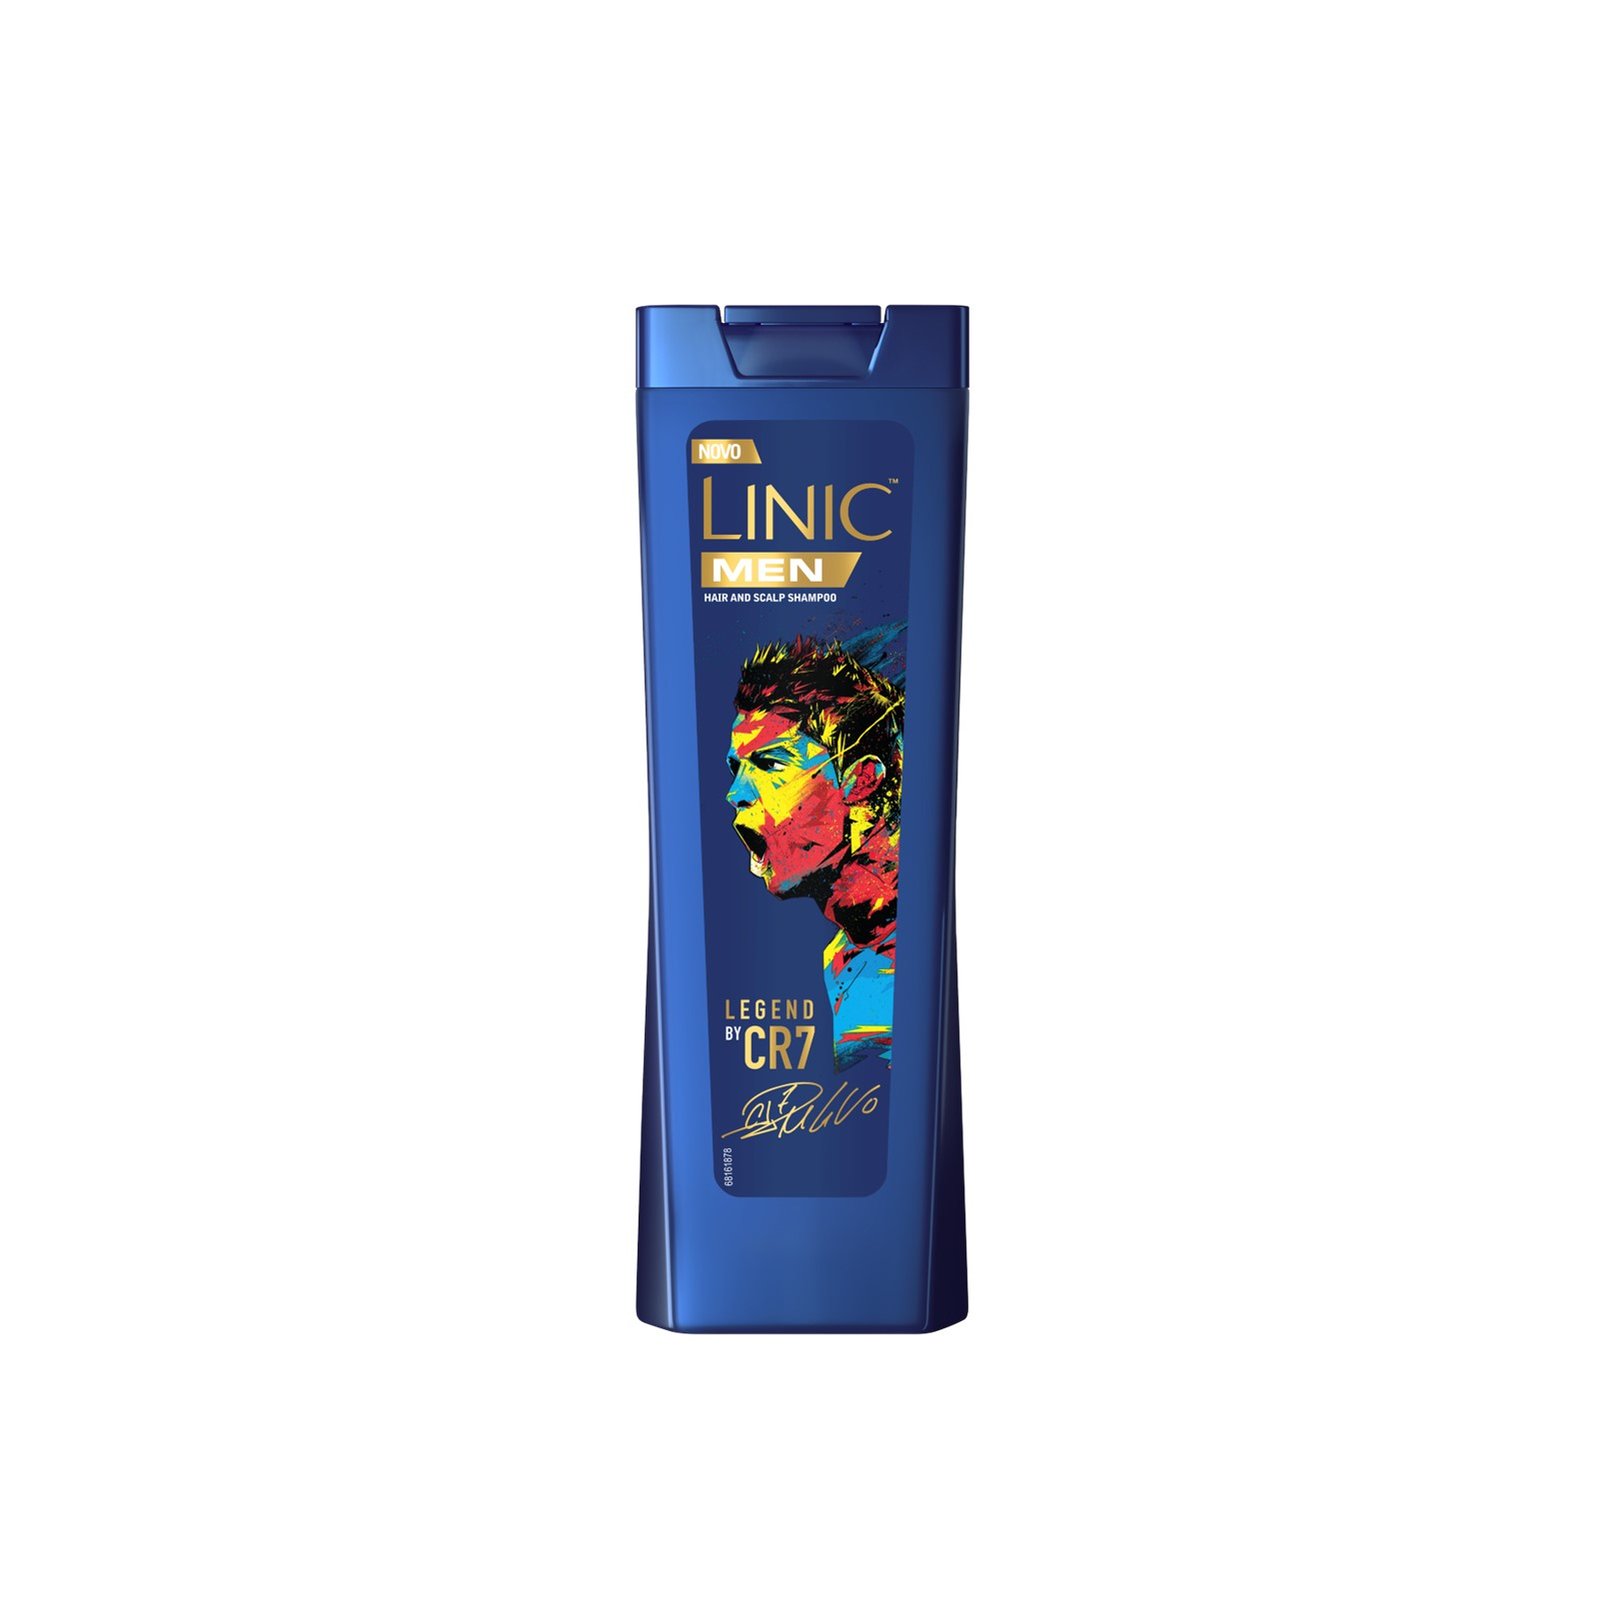 Linic Men Legend By CR7 Hair And Scalp Shampoo